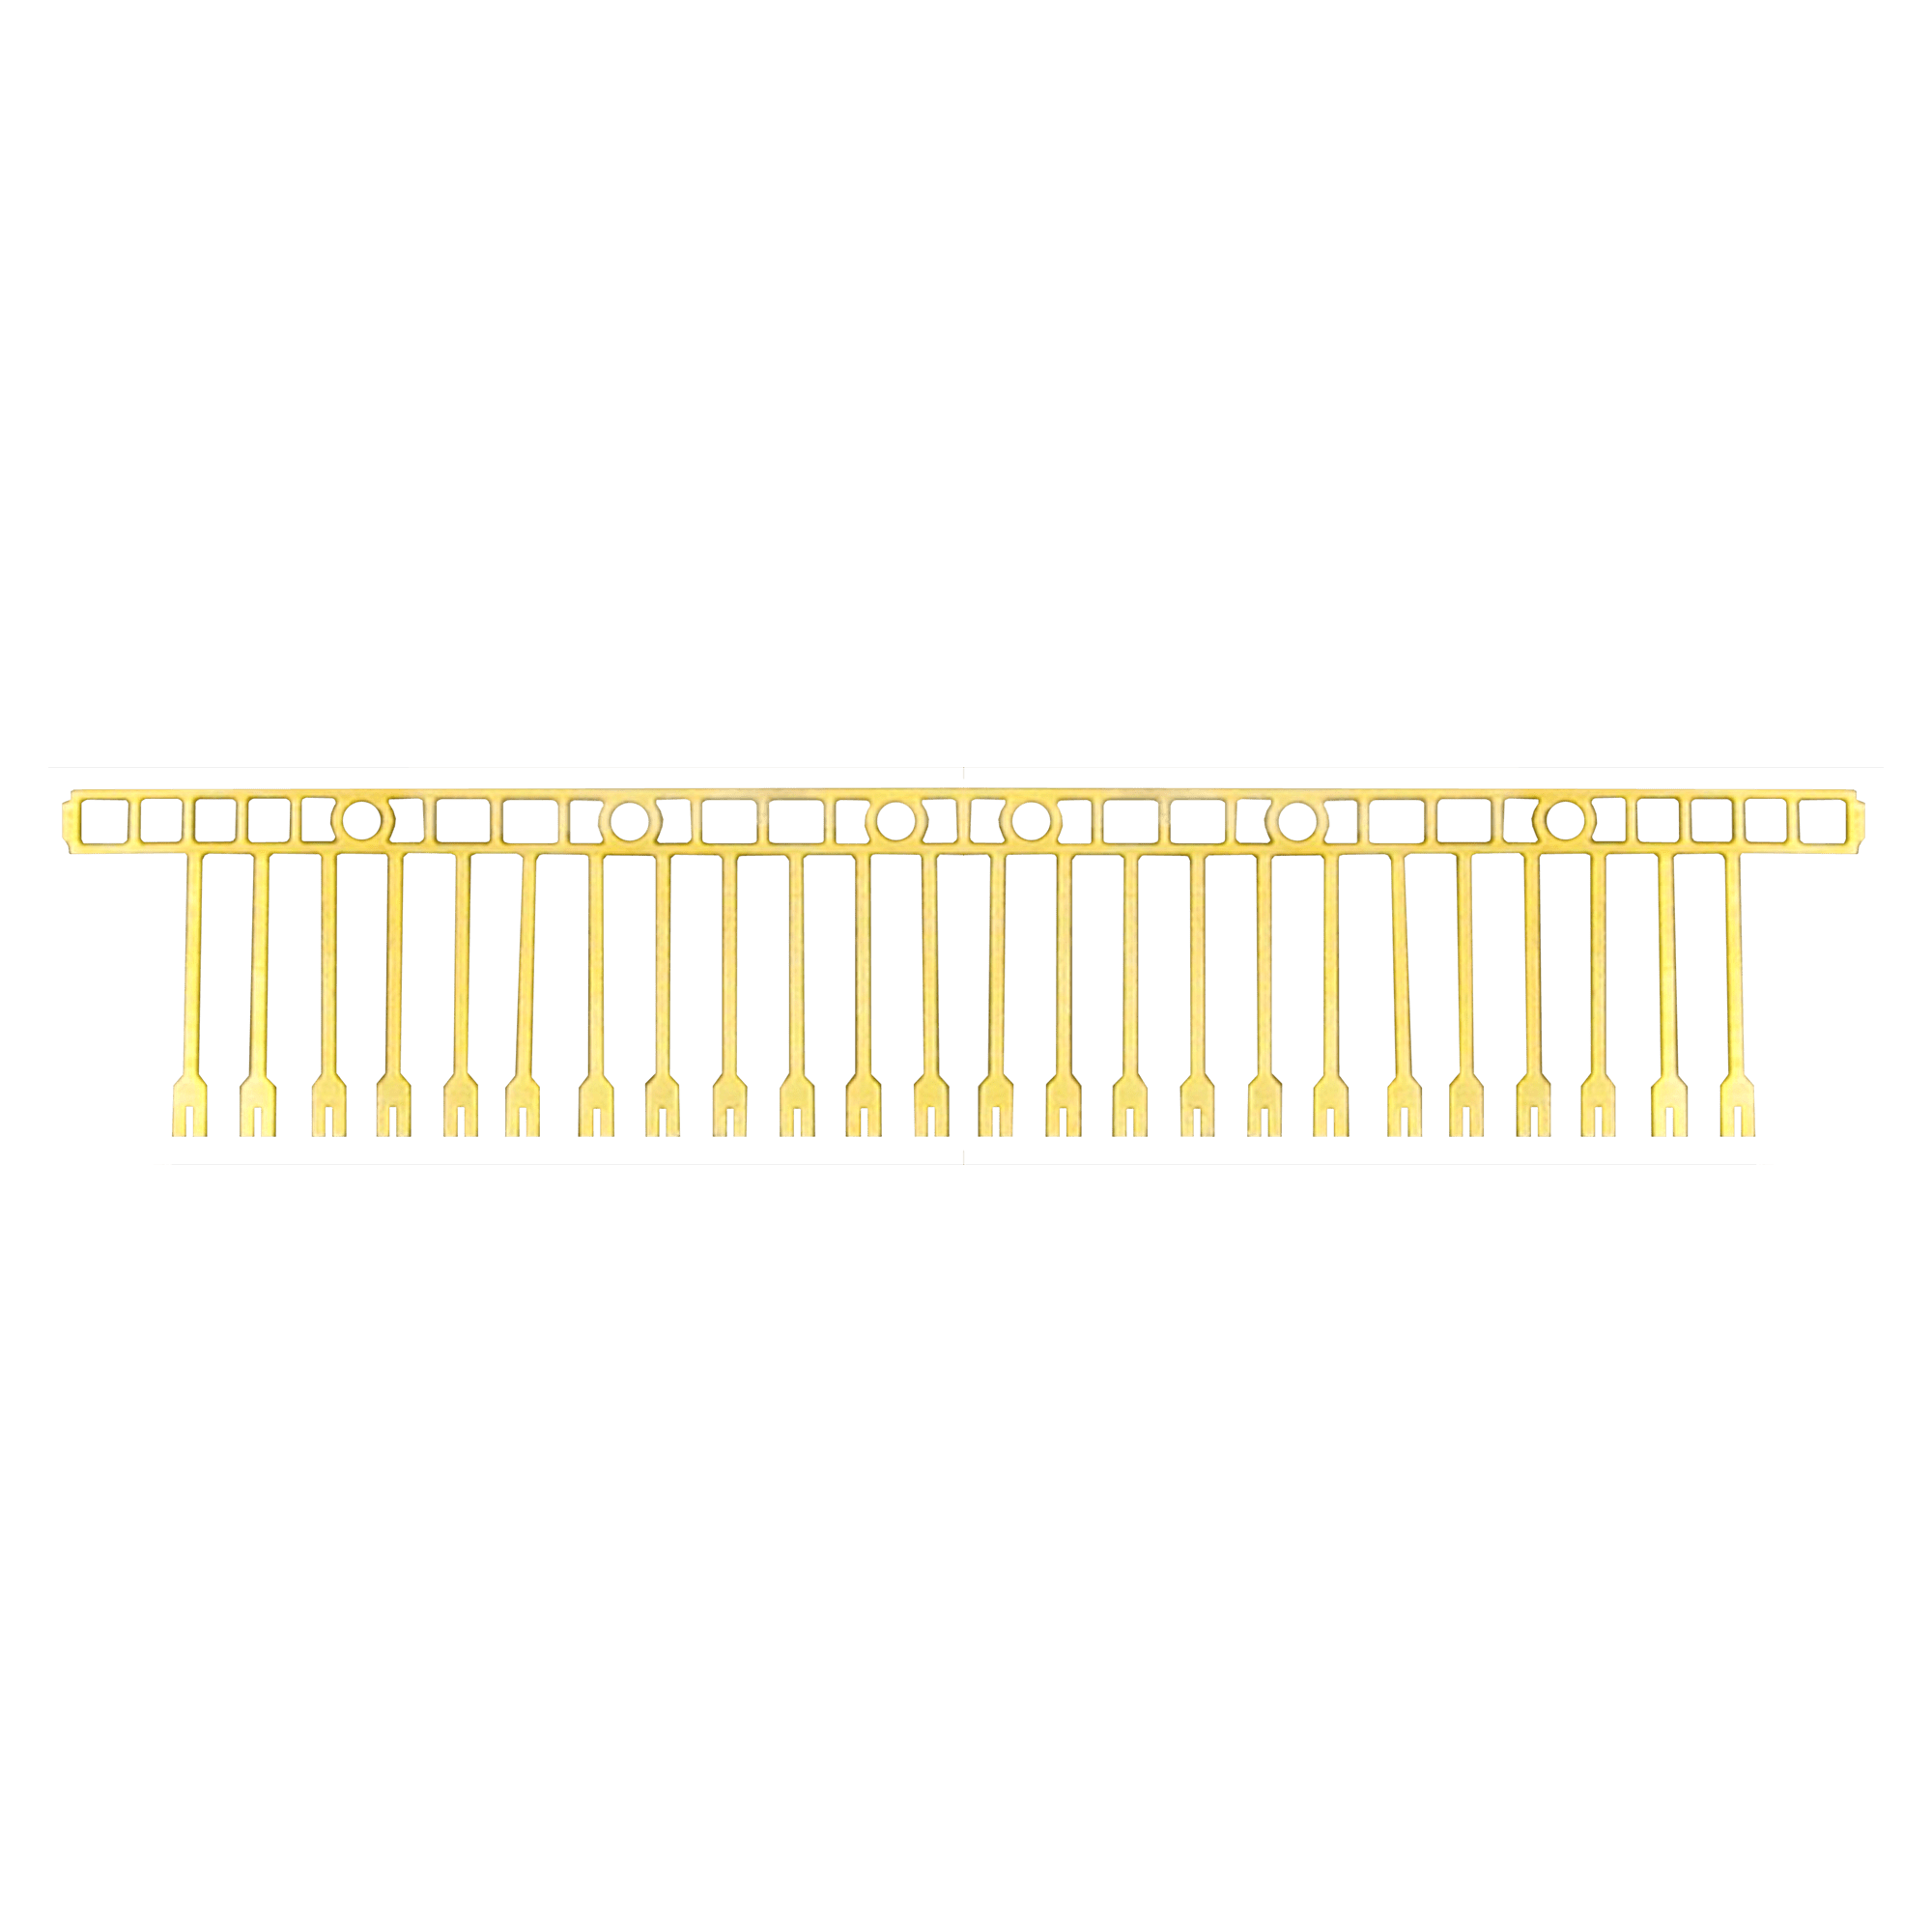 Kovar Gold Plated Contact Strip